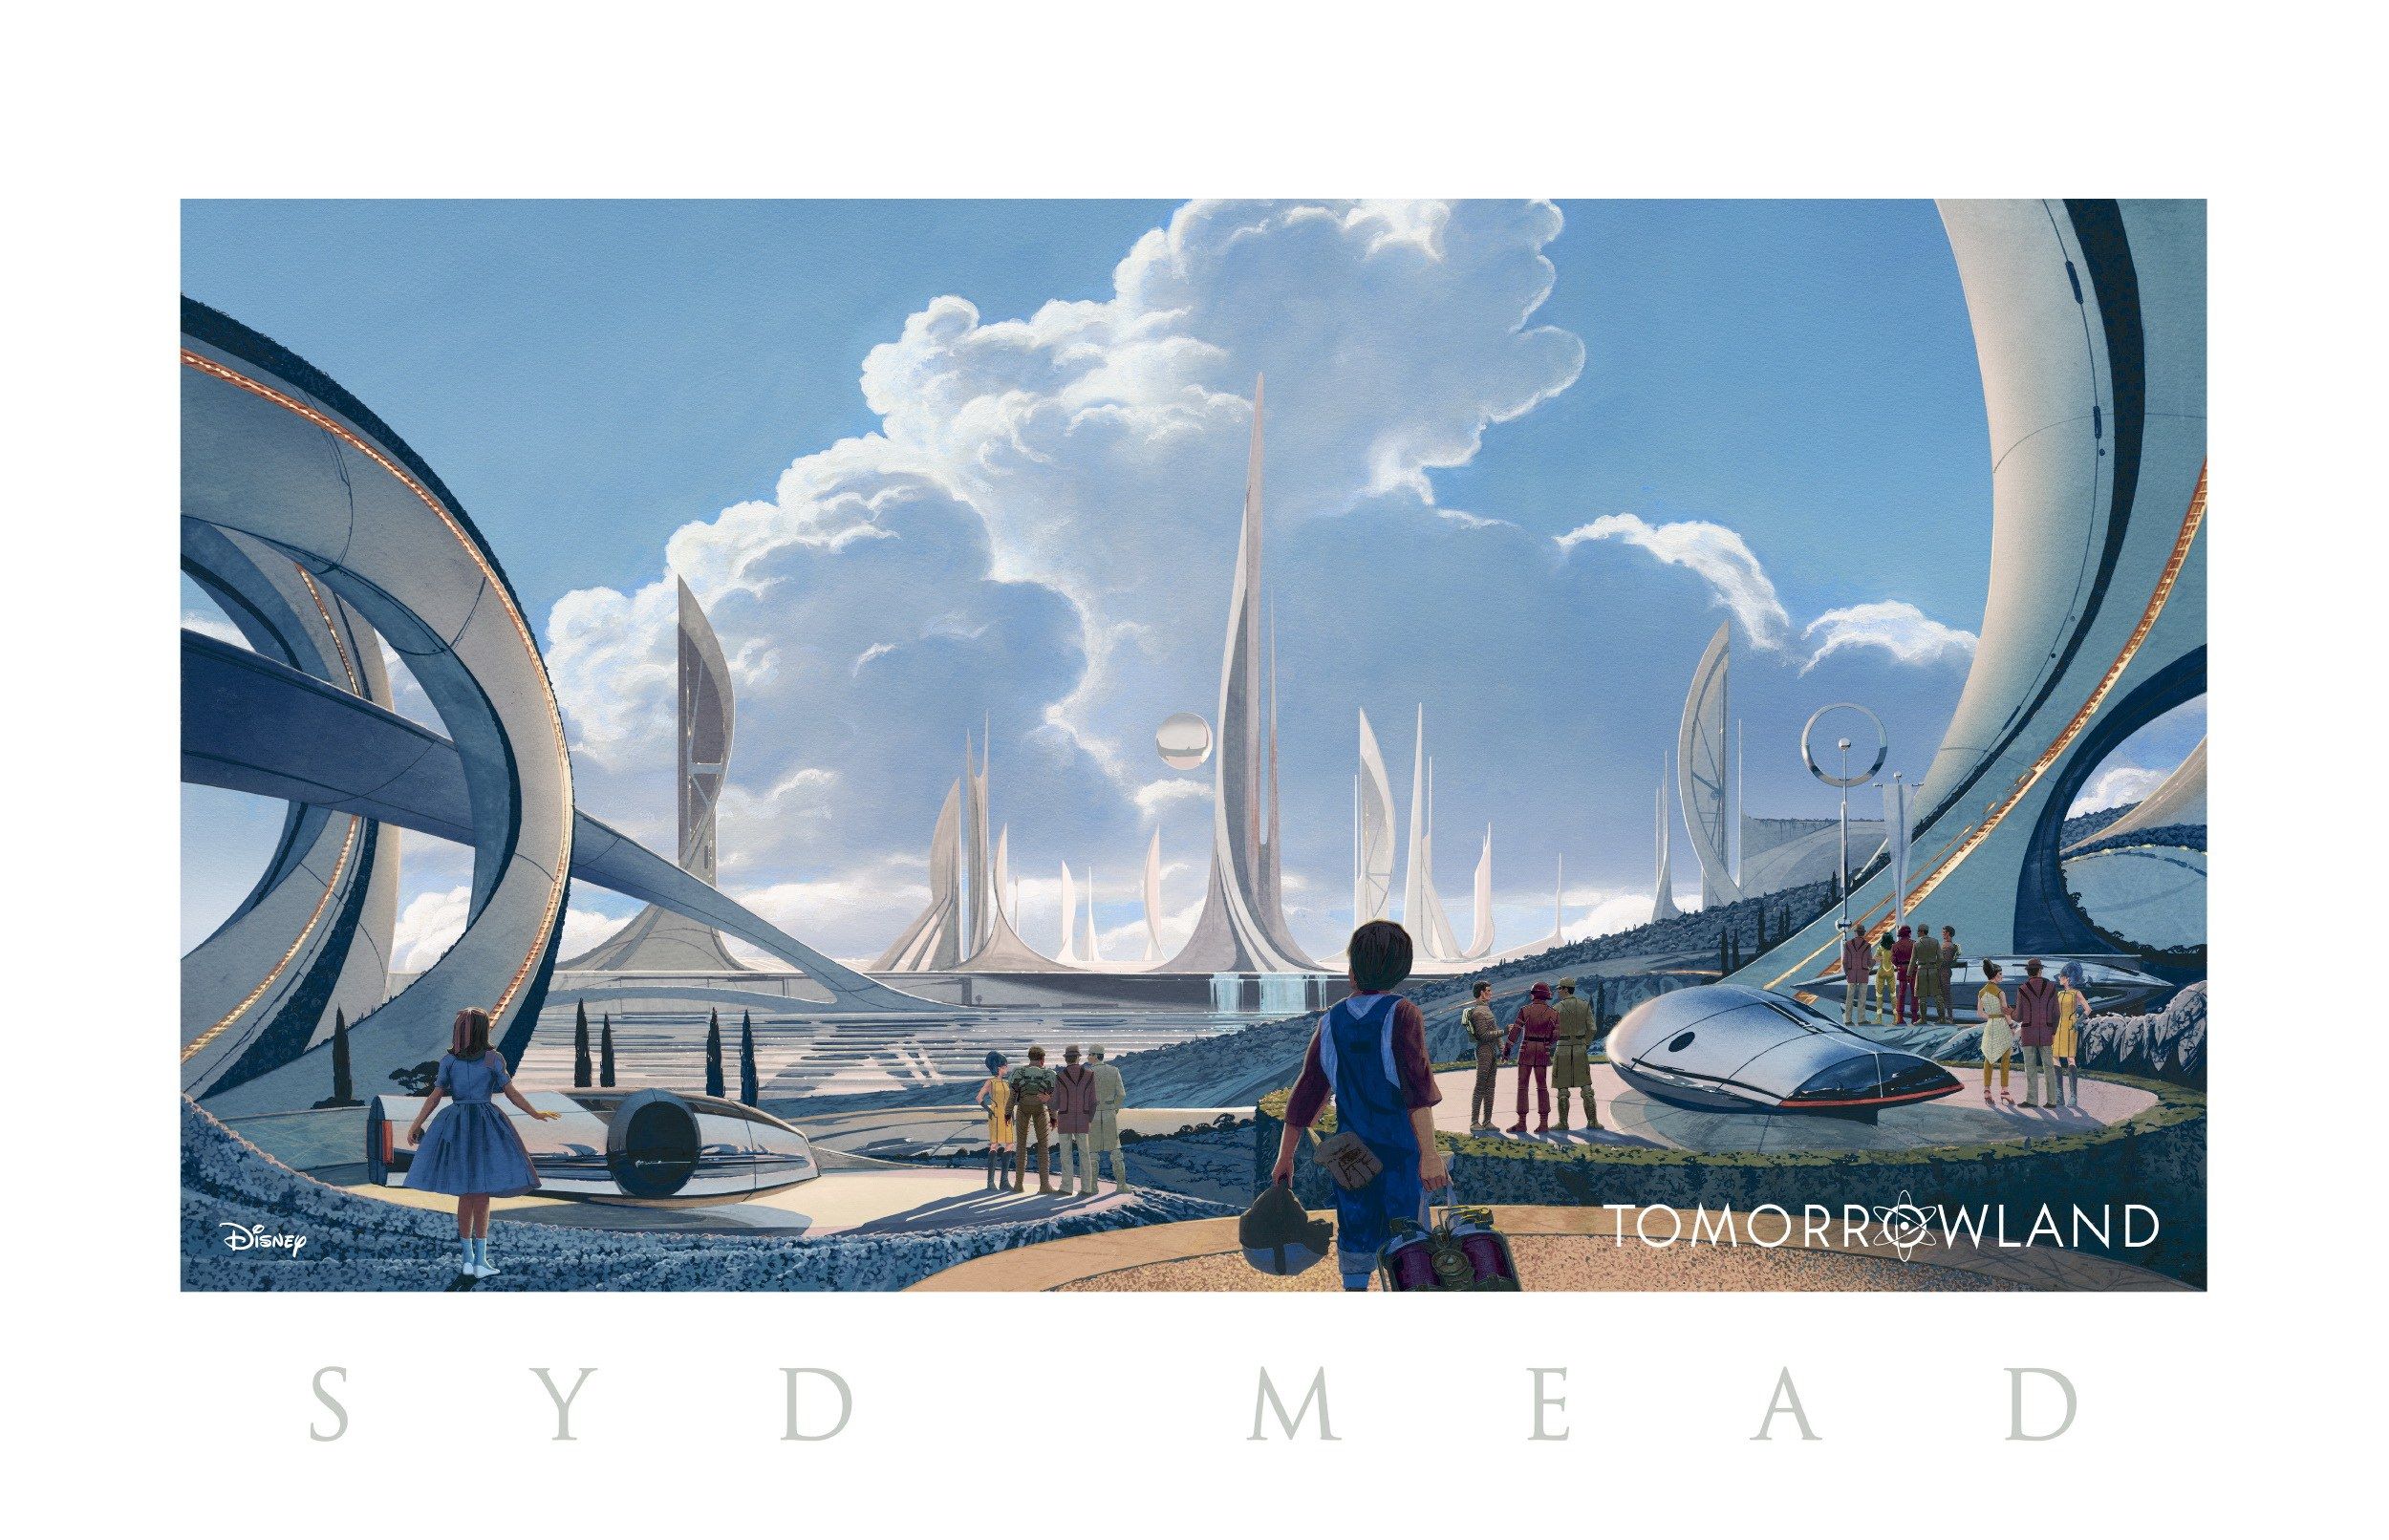 Tomorrowland concept art by Syd Mead